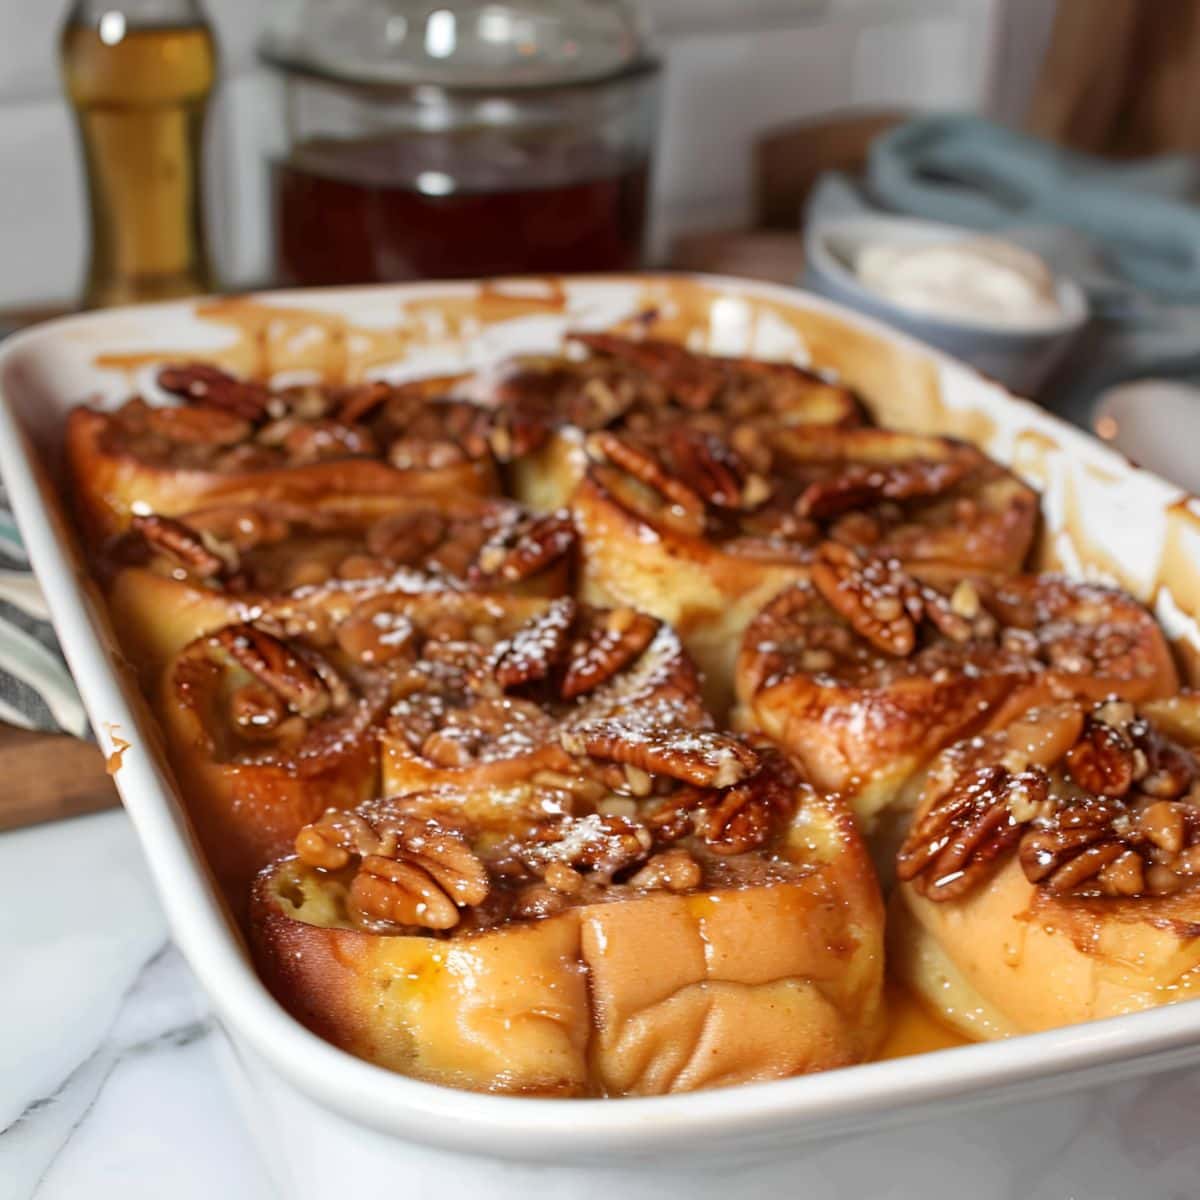 Paula Deen's French Toast in a White Casserole Dish with Pecan Praline Topping